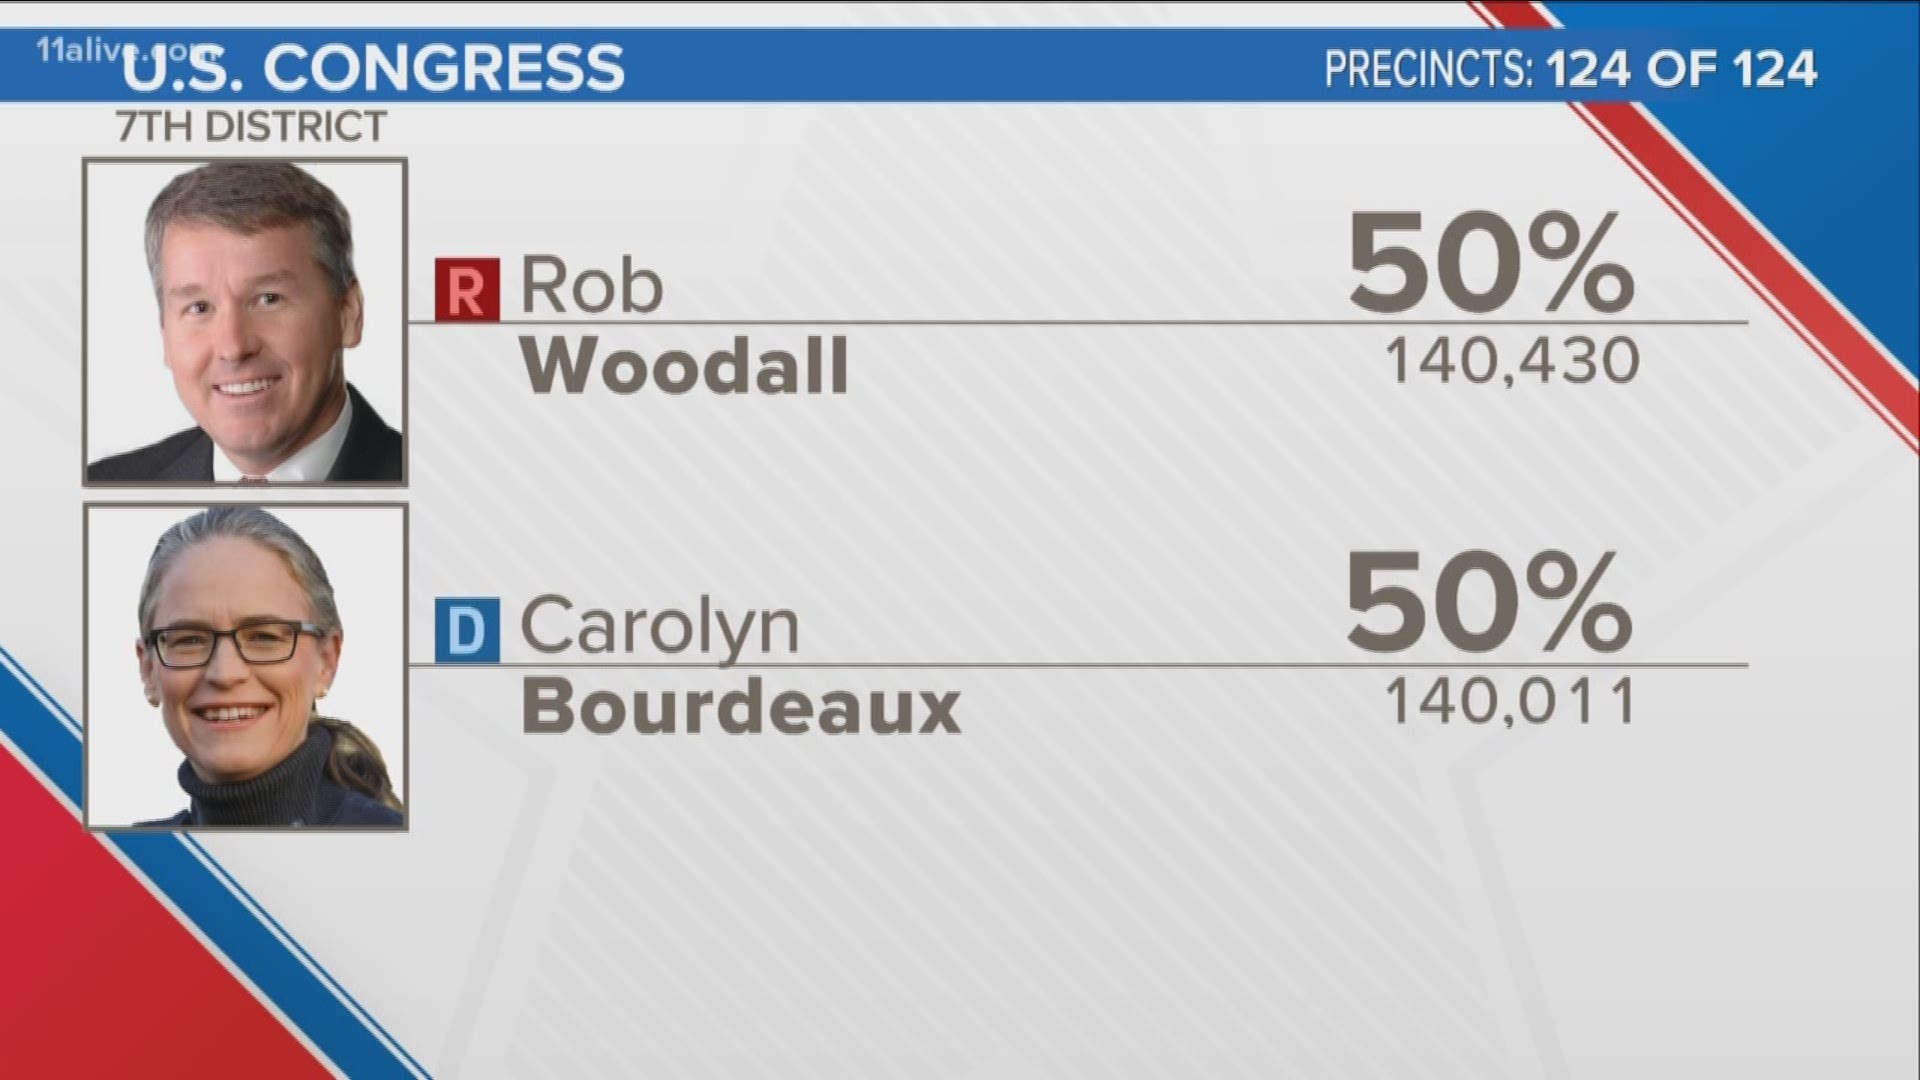 Carolyn Bourdeaux has announced she will be calling for a recount in the District 7 race against Republican incumbant Rob Woodall.